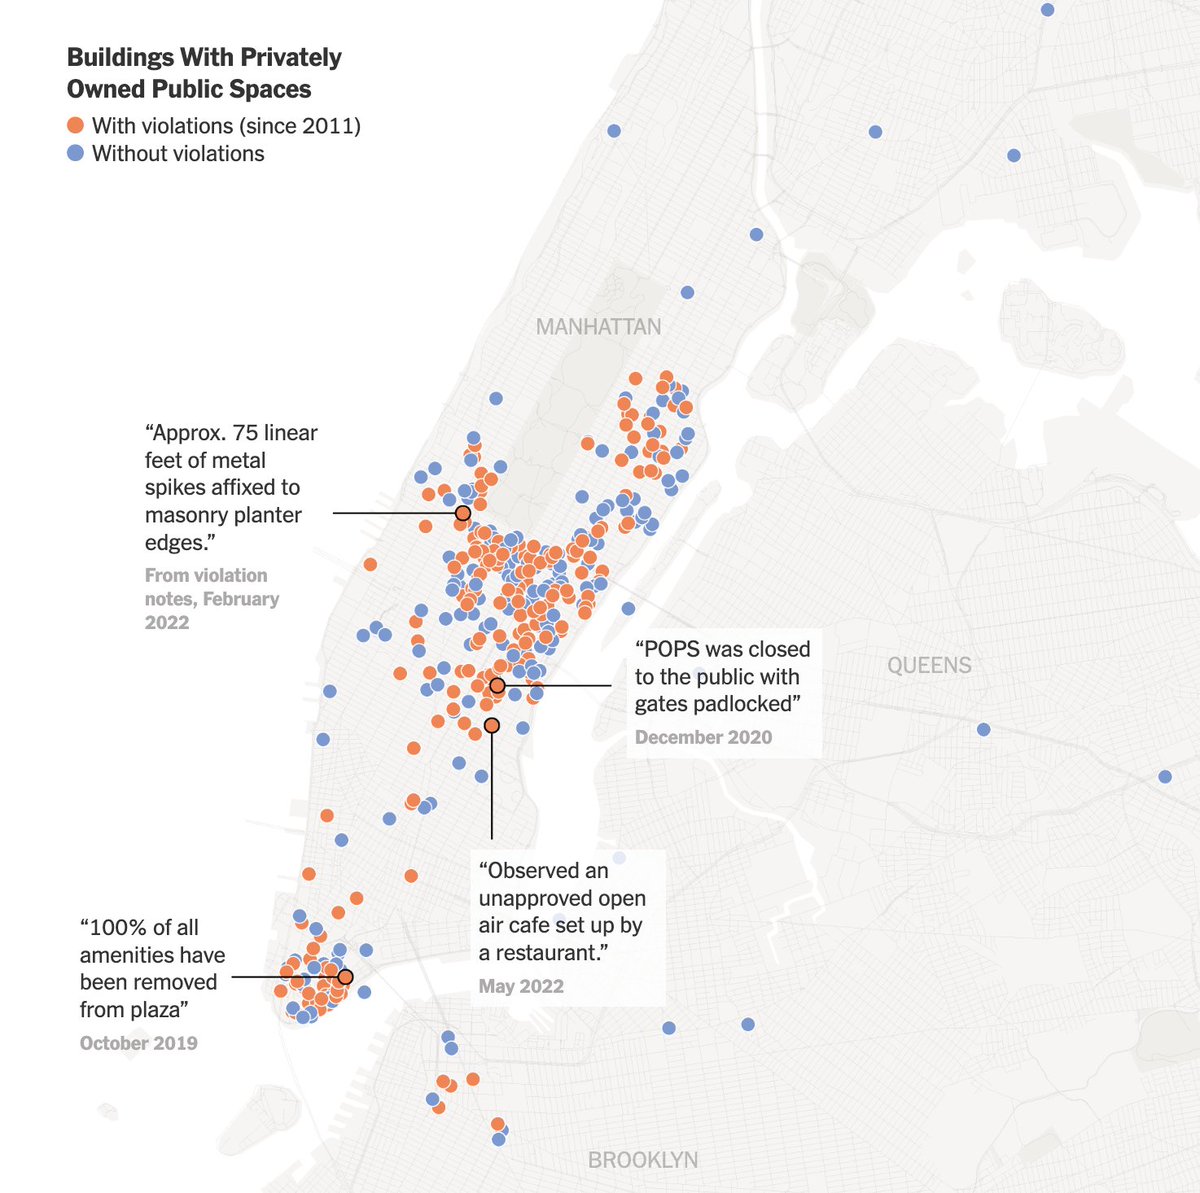 NYC developers have traded ~600 'privately owned public spaces' for 20 million sq ft of bonus floor area worth ~$10 billion. But half of the buildings were found to be violating the agreement. My first story for @nytimes, w/ @collinskeith & @DeniseDSLu nytimes.com/interactive/20…